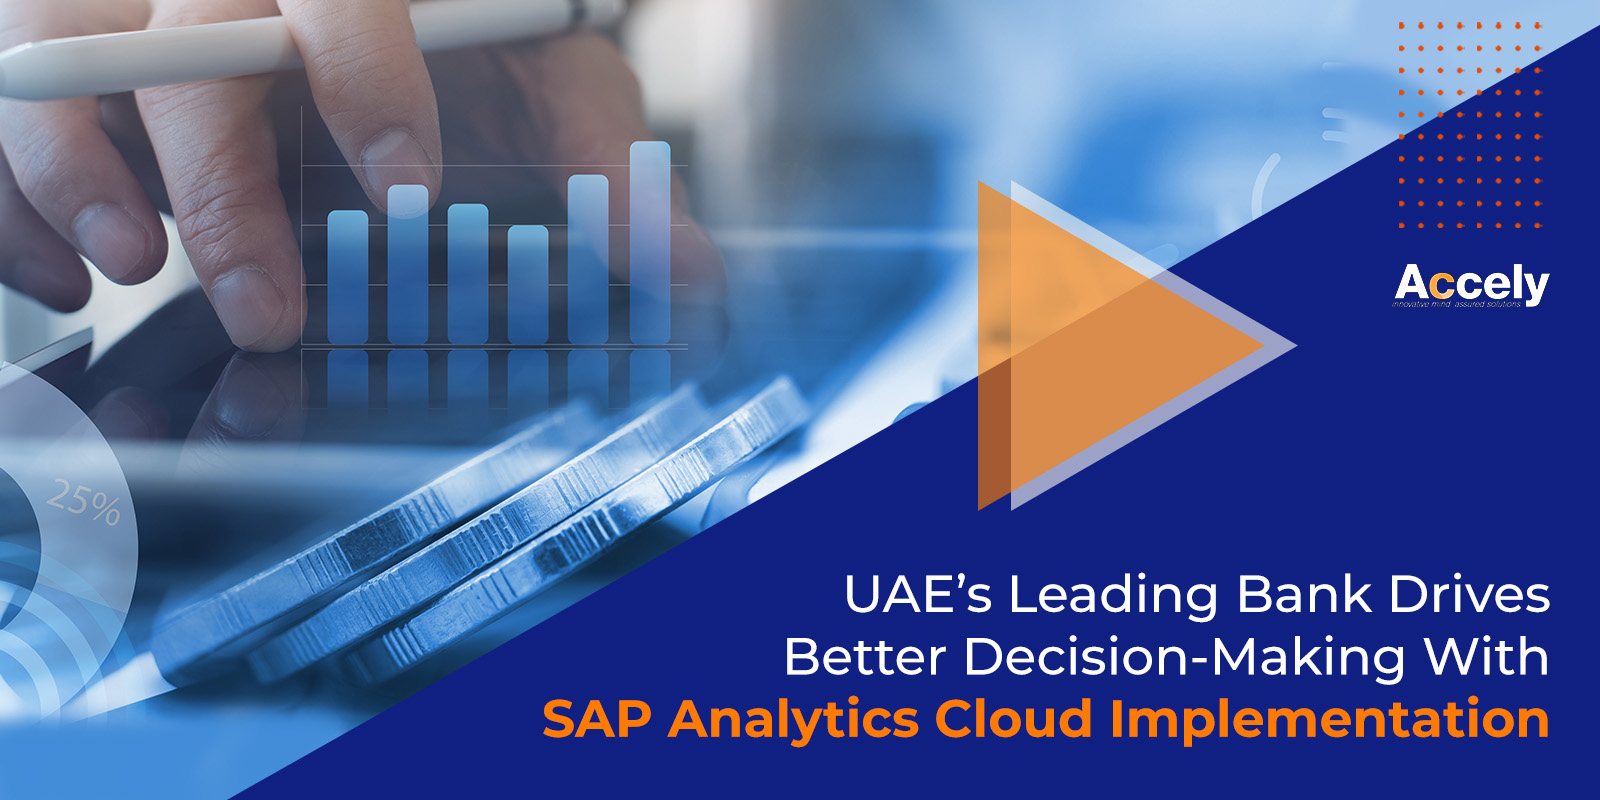 UAE’s Leading Bank Drives Better Decision-Making With SAP Analytics Cloud Implementation